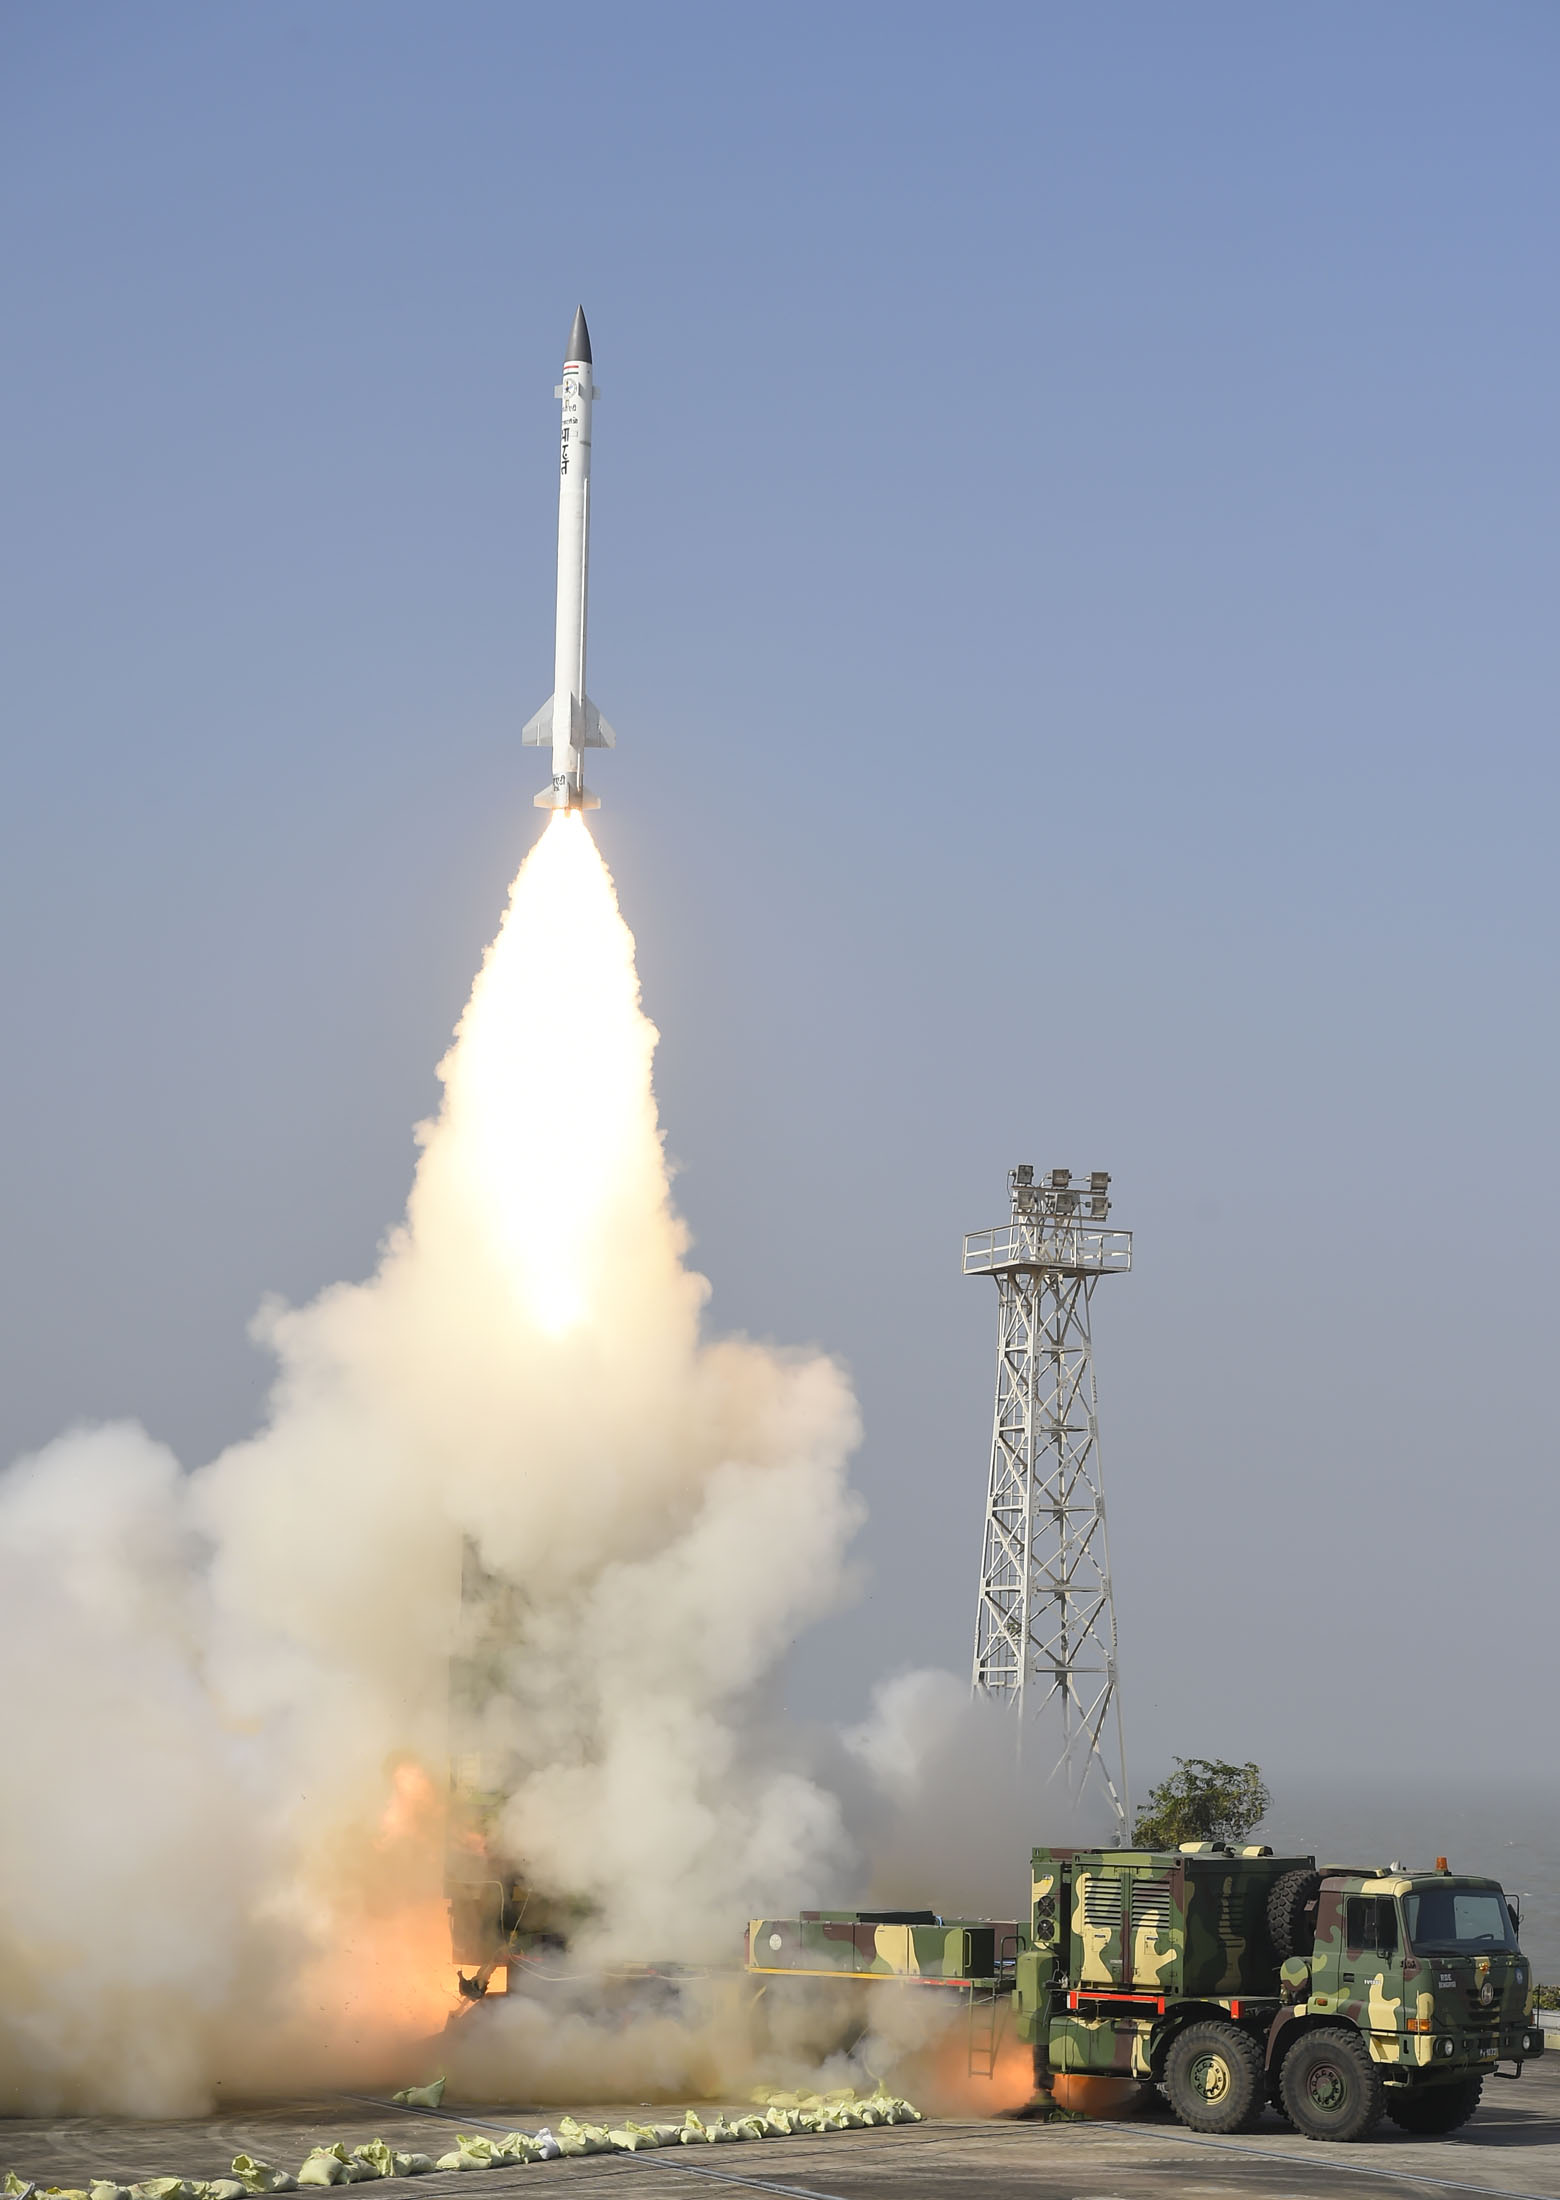 The Ballistic Missile Defence (BMD) System of Defence Research and Development Organisation (DRDO) successfully launched from Dr. Abdul Kalam Island off the coast of Odisha on December 28, 2017.